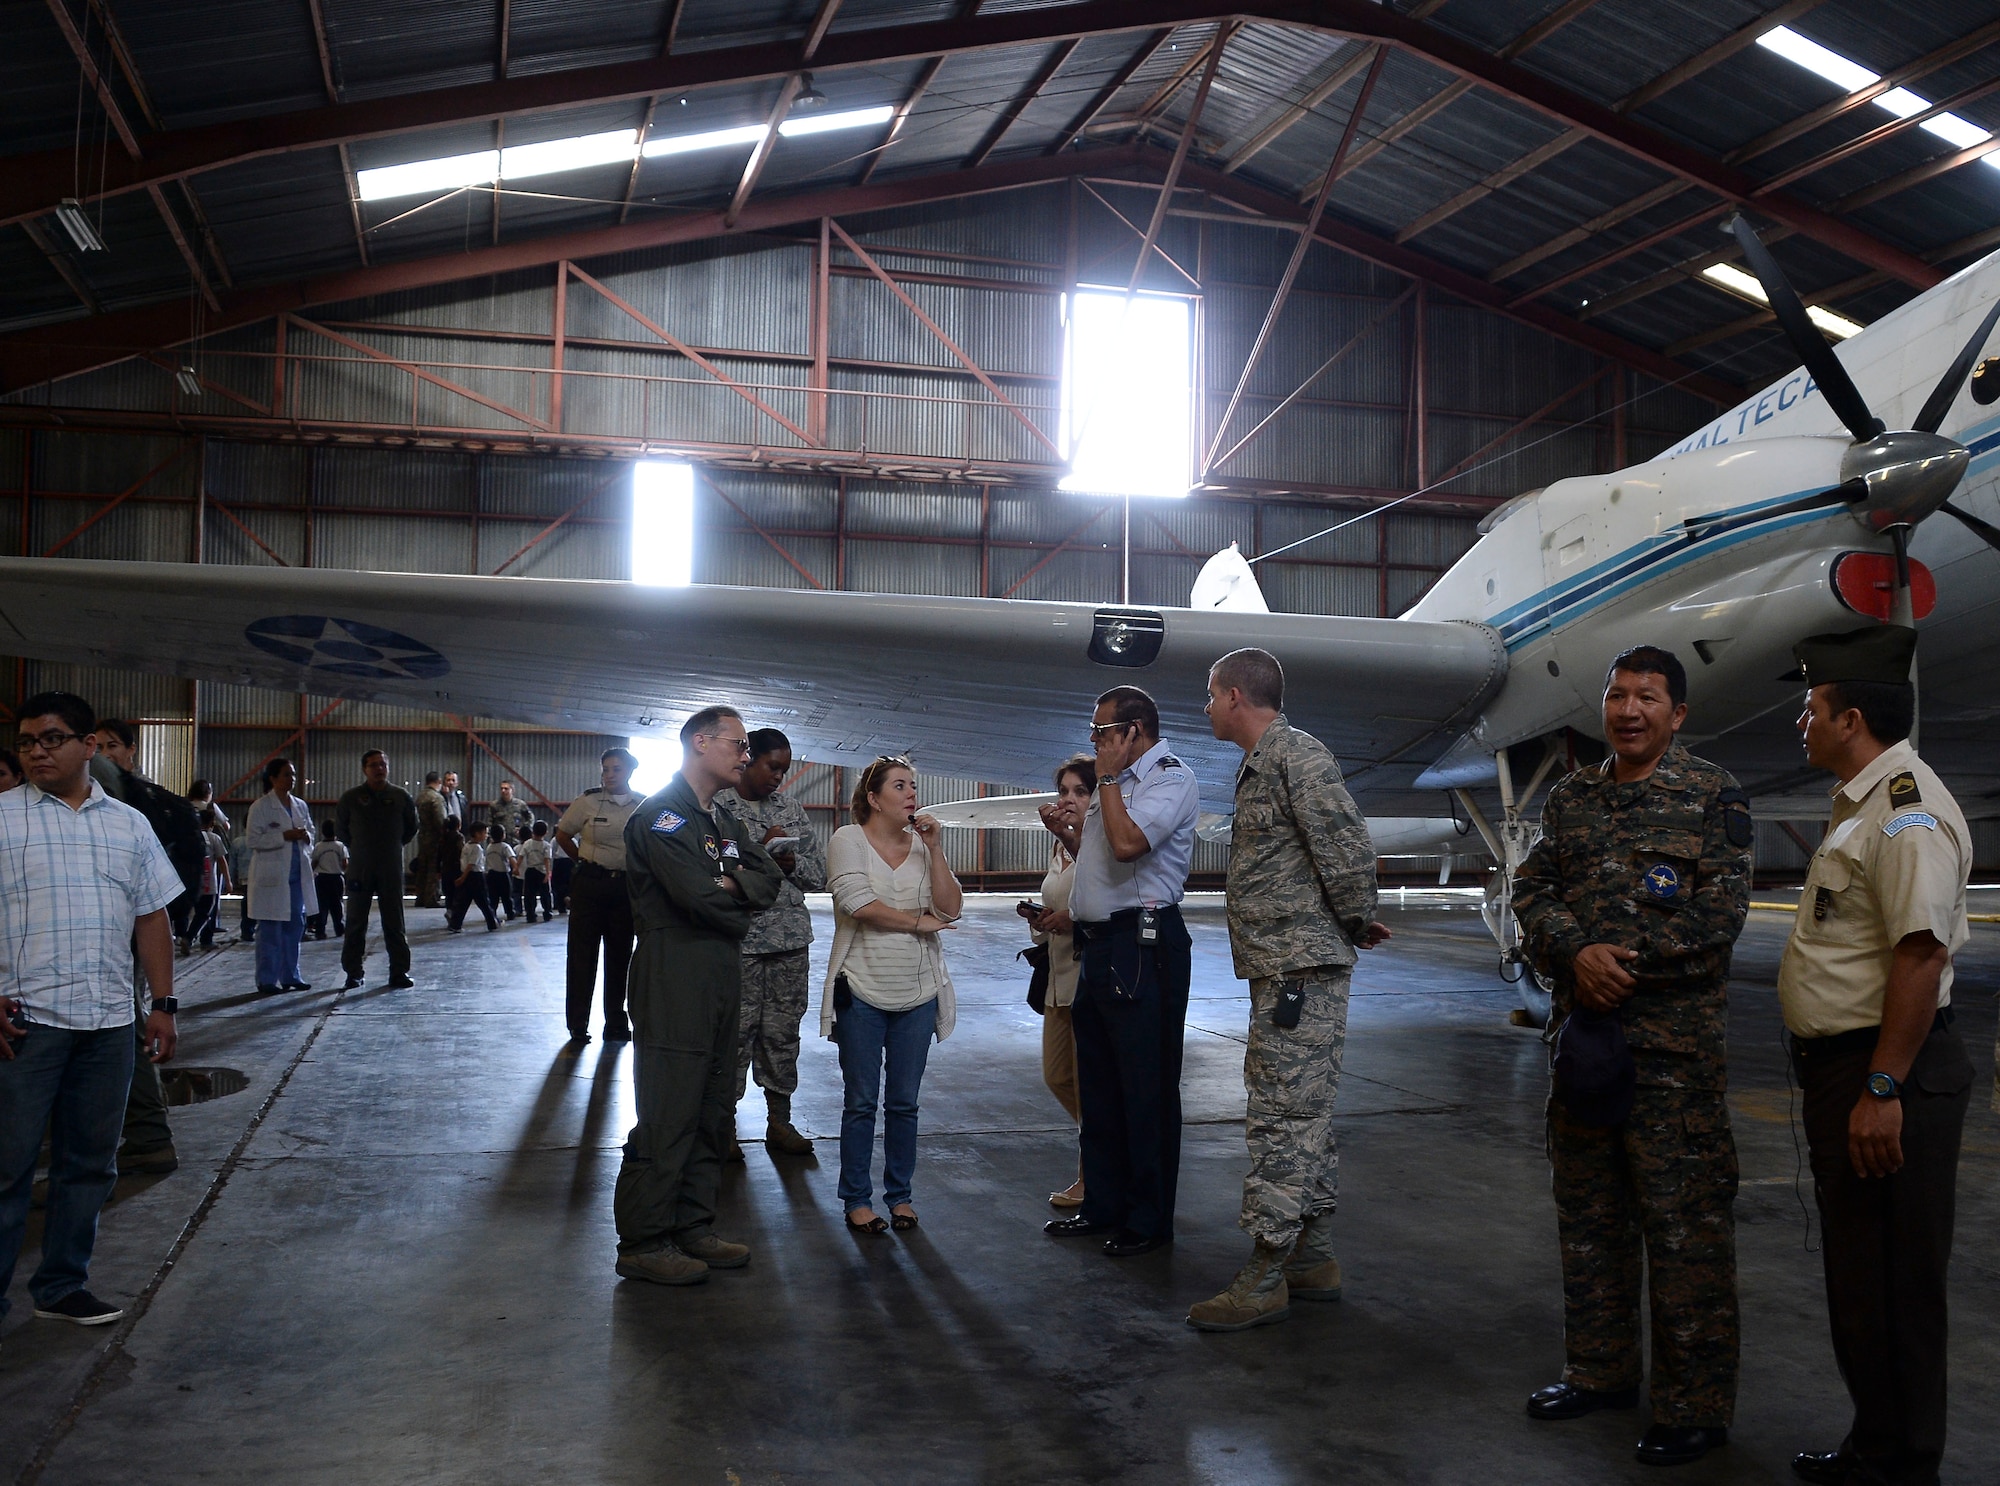 Col. Luis Salazar, Guatemalan air force Hospilito director, shows members of 12th Air Force (Air Forces Southern) and the Arkansas Air National Guard the Guatemalan’s Basler BT-67, which is used for patient transport, as part of a tour of the Guatemalan air force base during a subject matter expert exchange with the Guatemalan Military in Guatemala City, Guatemala, Aug. 6, 2014.  The tour informed the U.S. medical technicians of the capabilities of the Guatemalan air force. (U.S. Air Force photo by Tech. Sgt. Heather R. Redman/Released)